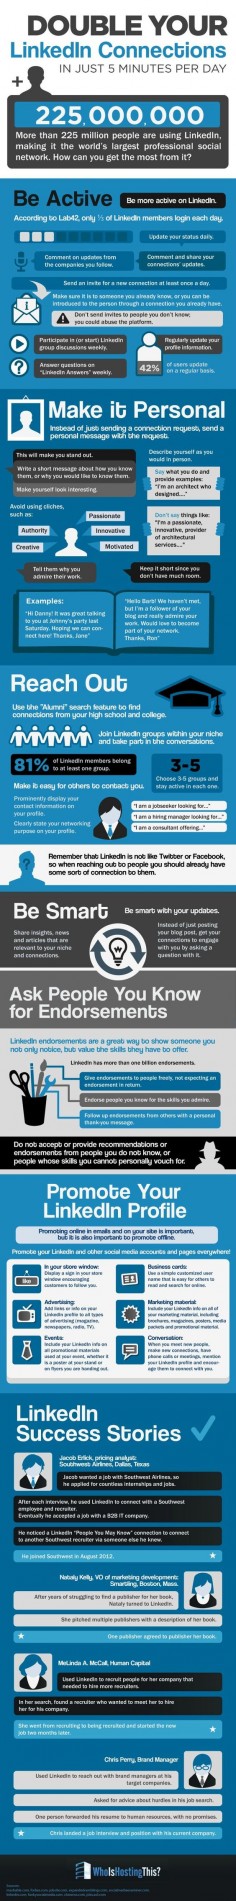 10 Simple Tips to Double your LinkedIn Connections